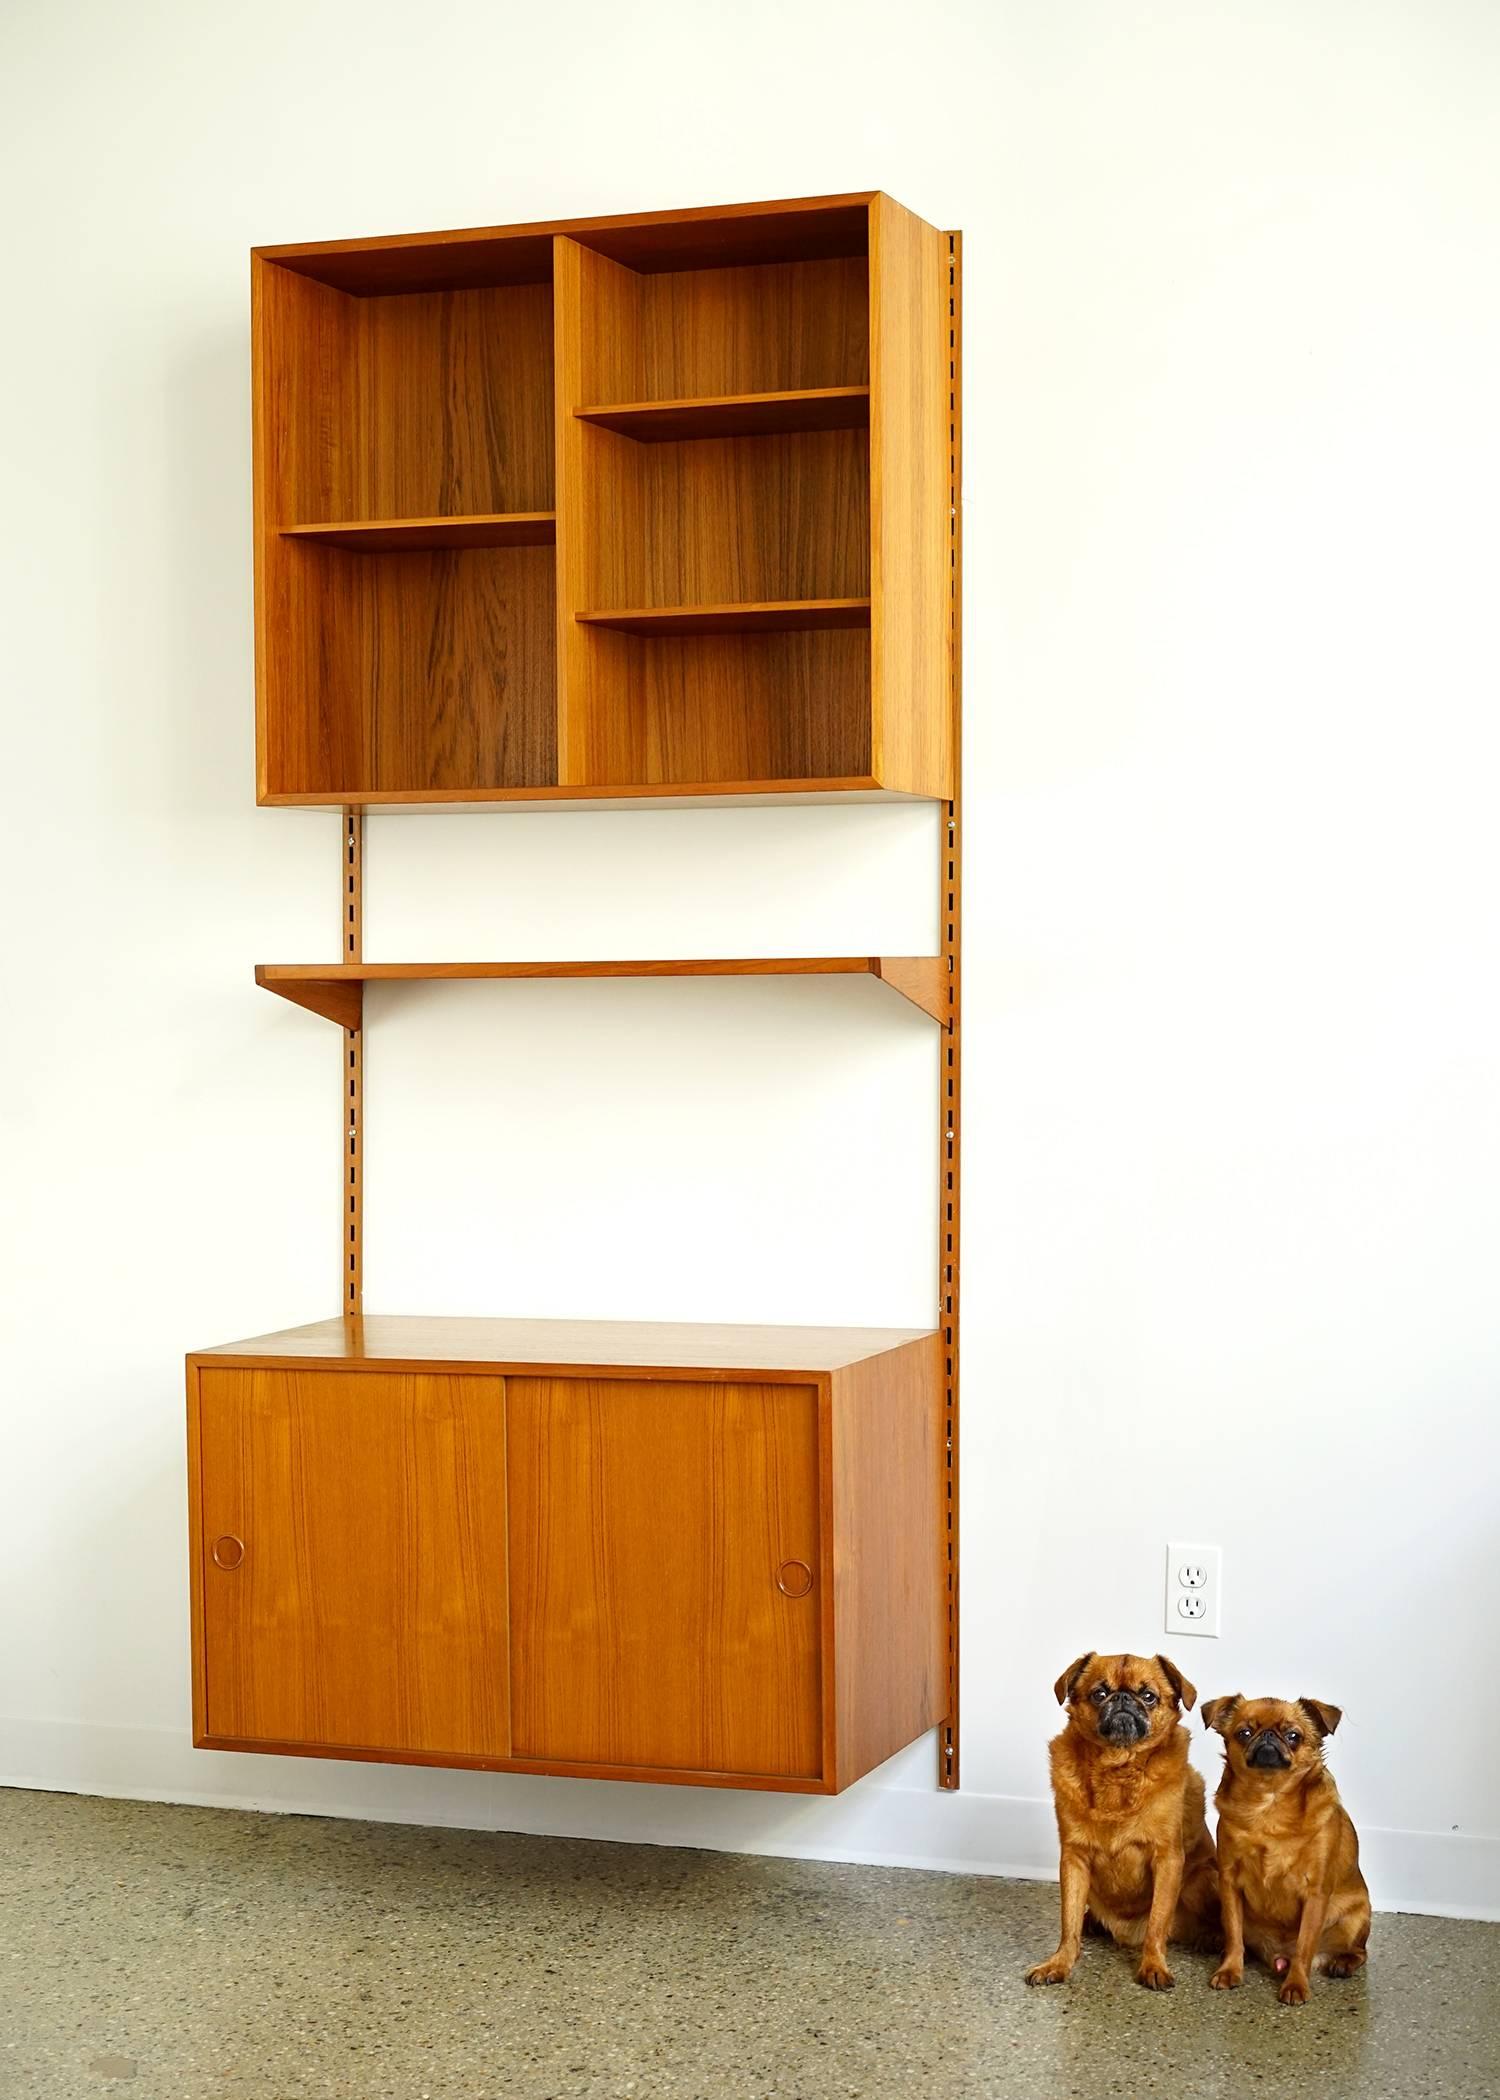 Three components mounted on vertical rails which allow adjustable height and arrangement. Teak construction with original finish in good condition. Interior shelves are adjustable. Handsome and functional.
Measures:
Open shelves: W 33.75